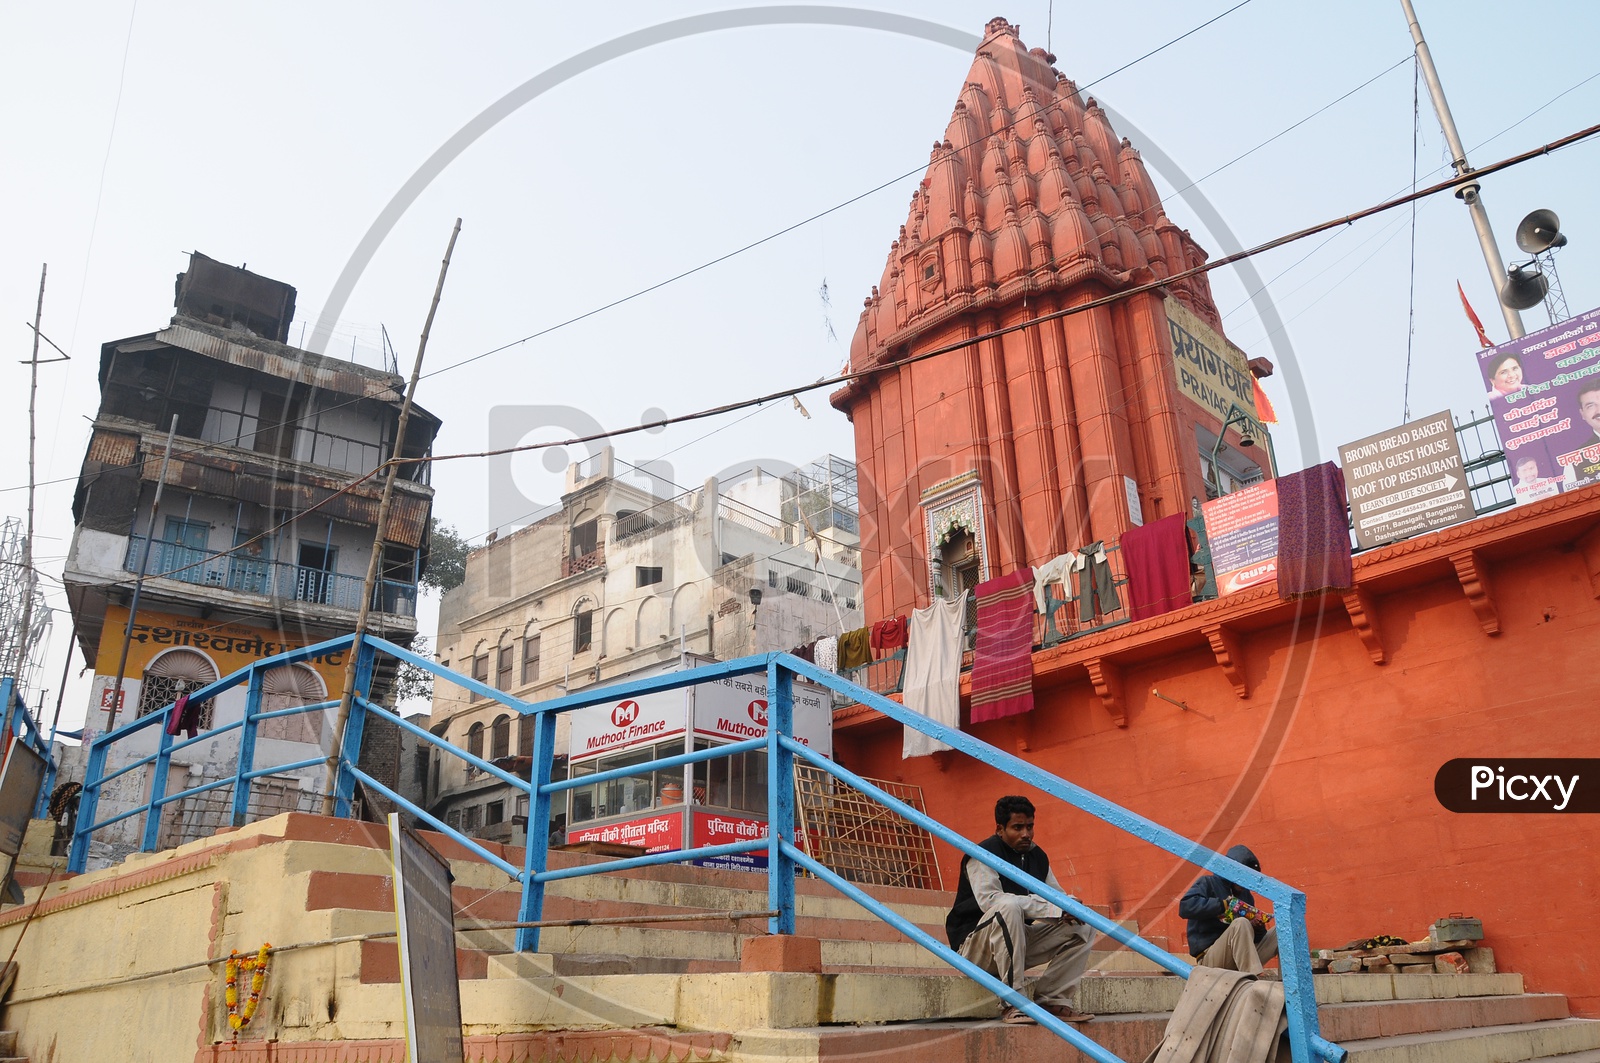 Ghats In Varanasi With Hindu  Temples And Boats on Ganga River